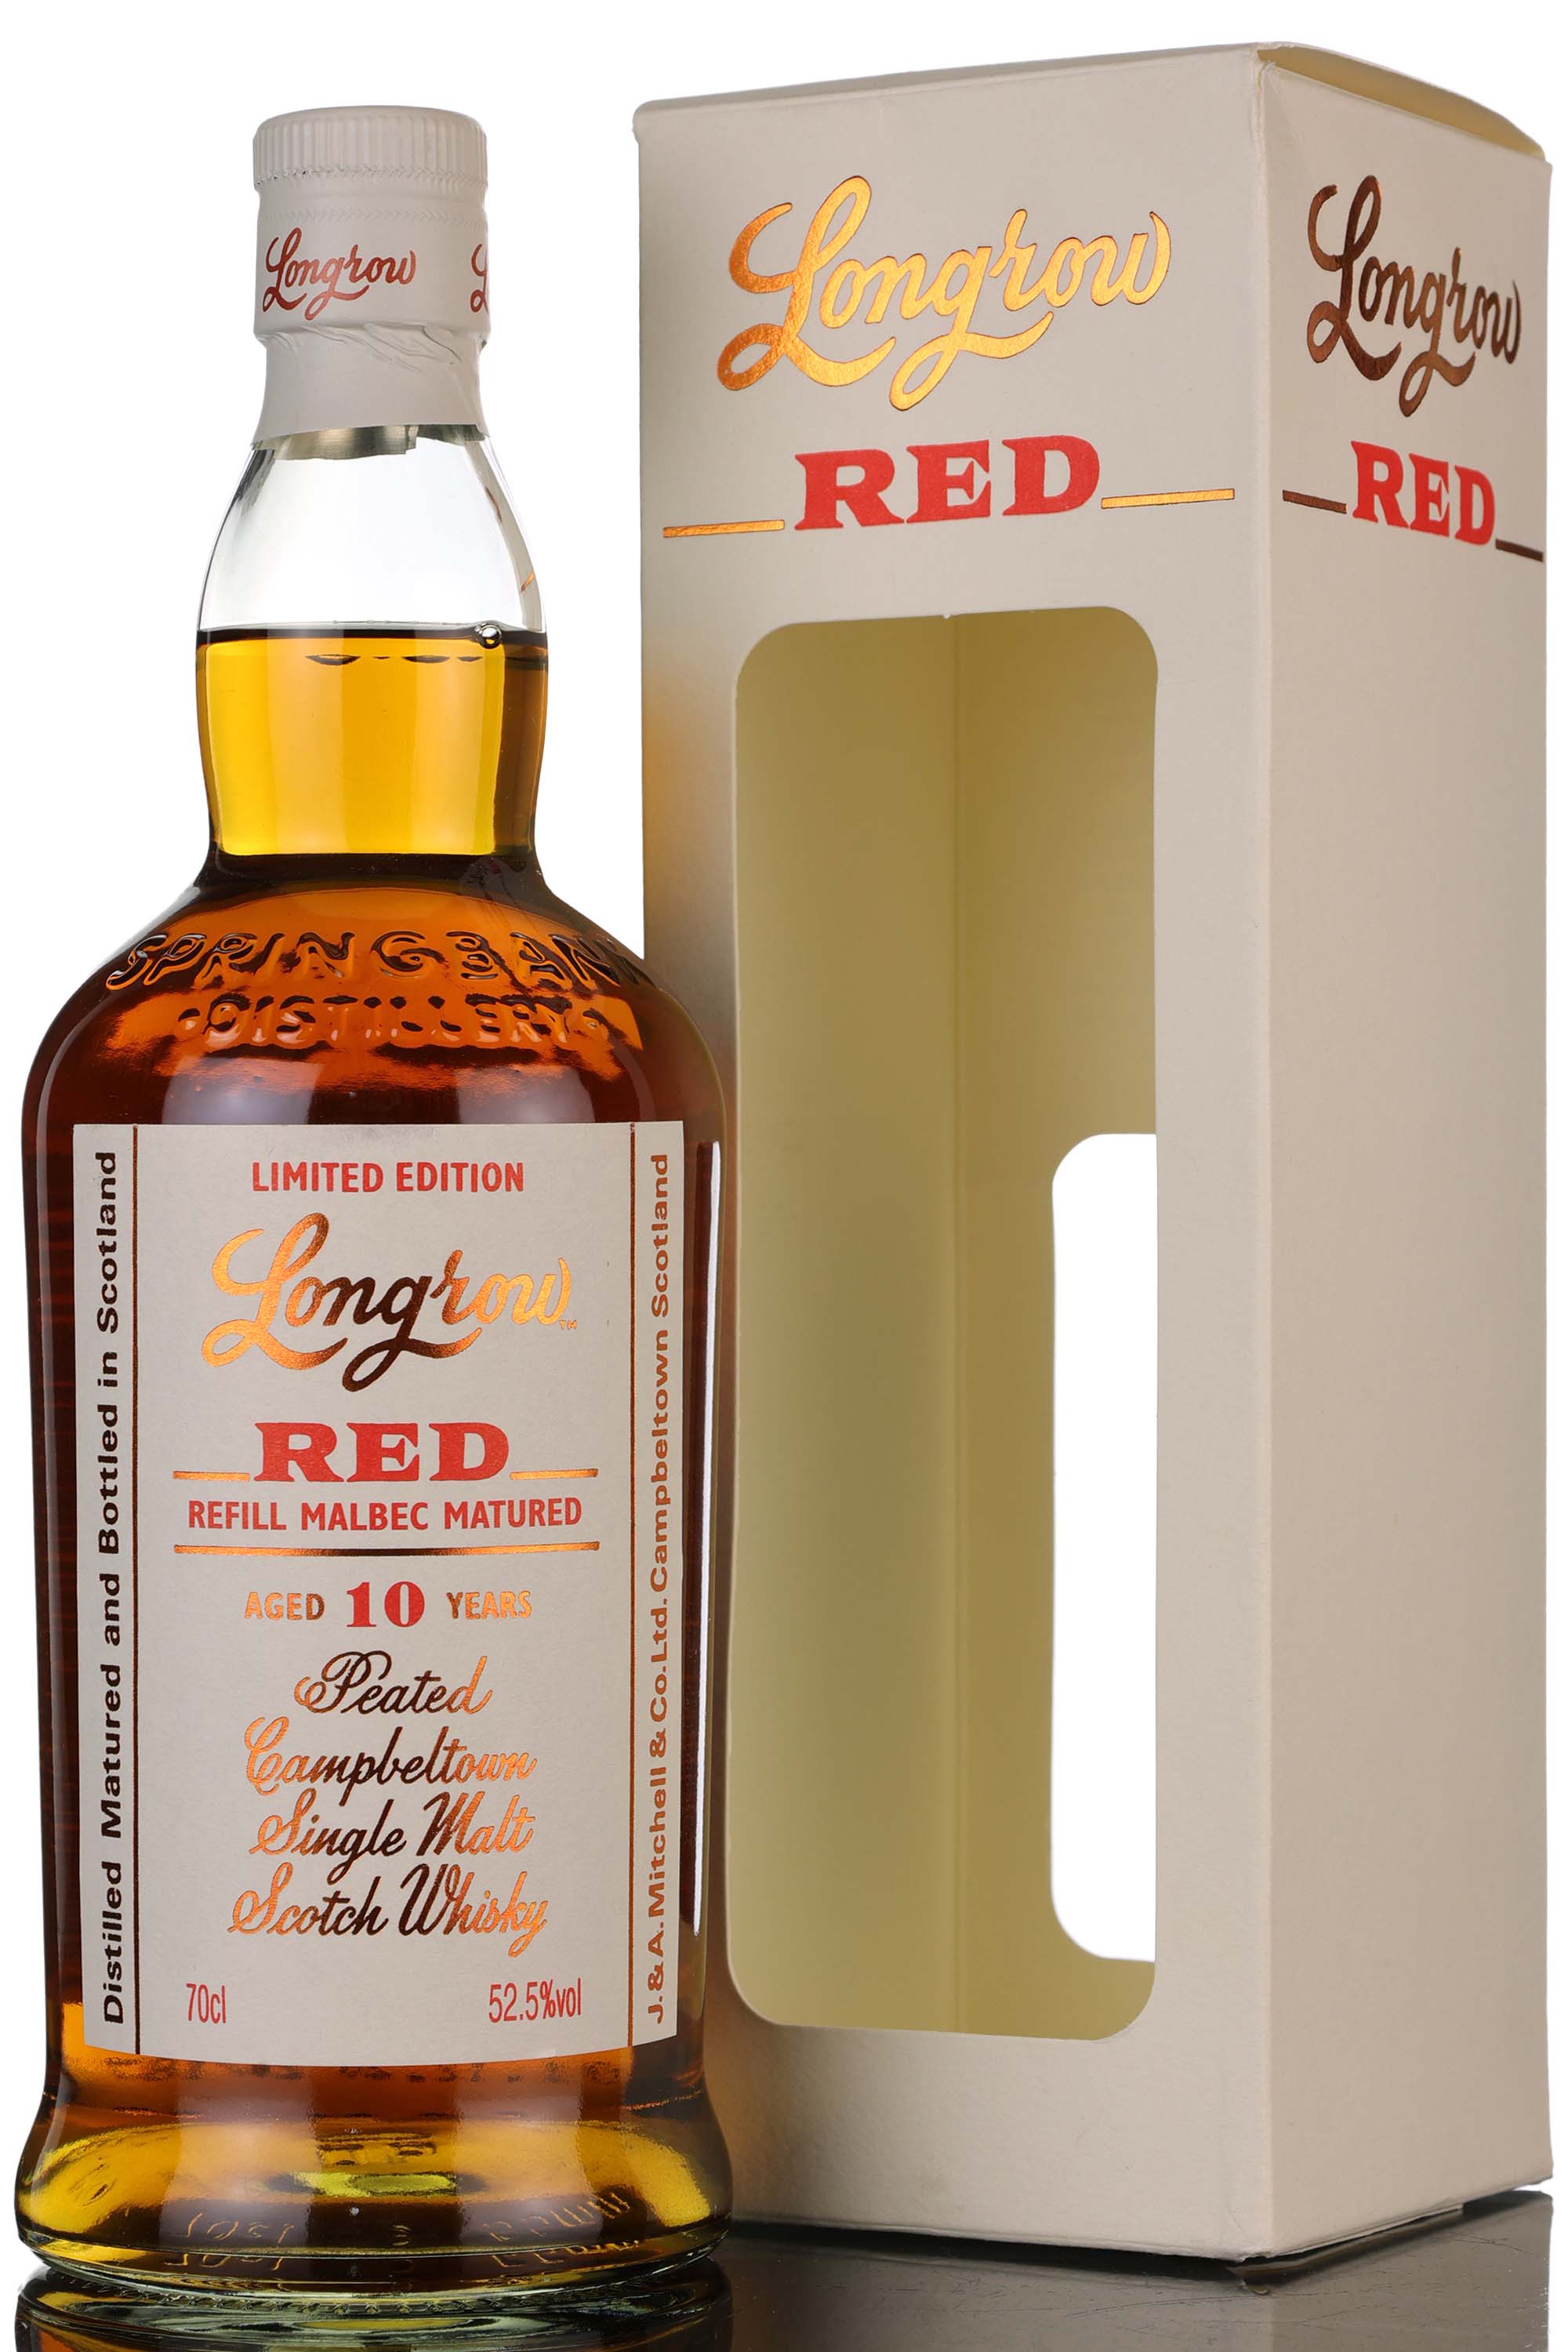 Longrow Red 10 Year Old - Refill Malbec Matured - 2020 Release